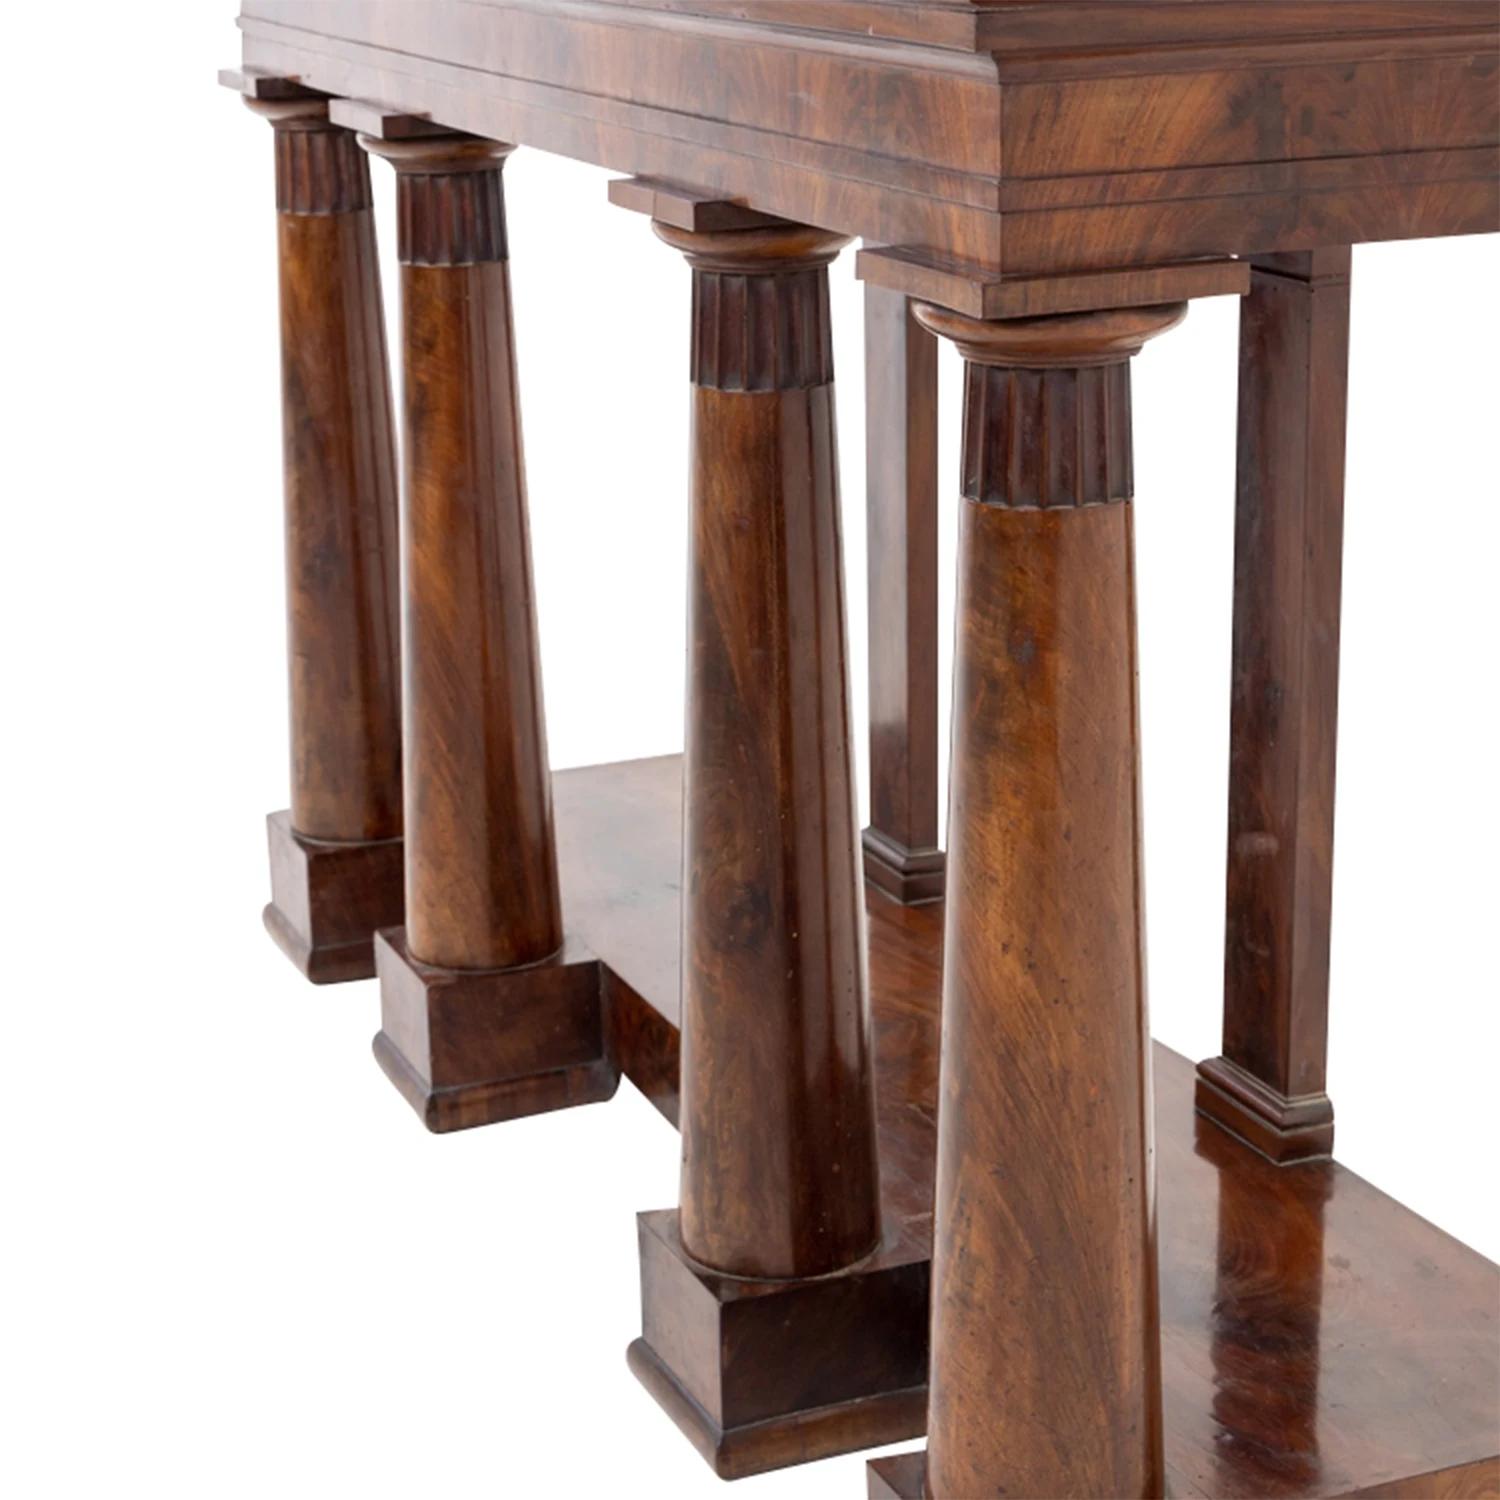 Marble 19th Century Italian Freestanding Mahogany Center Table - Antique Console Table For Sale